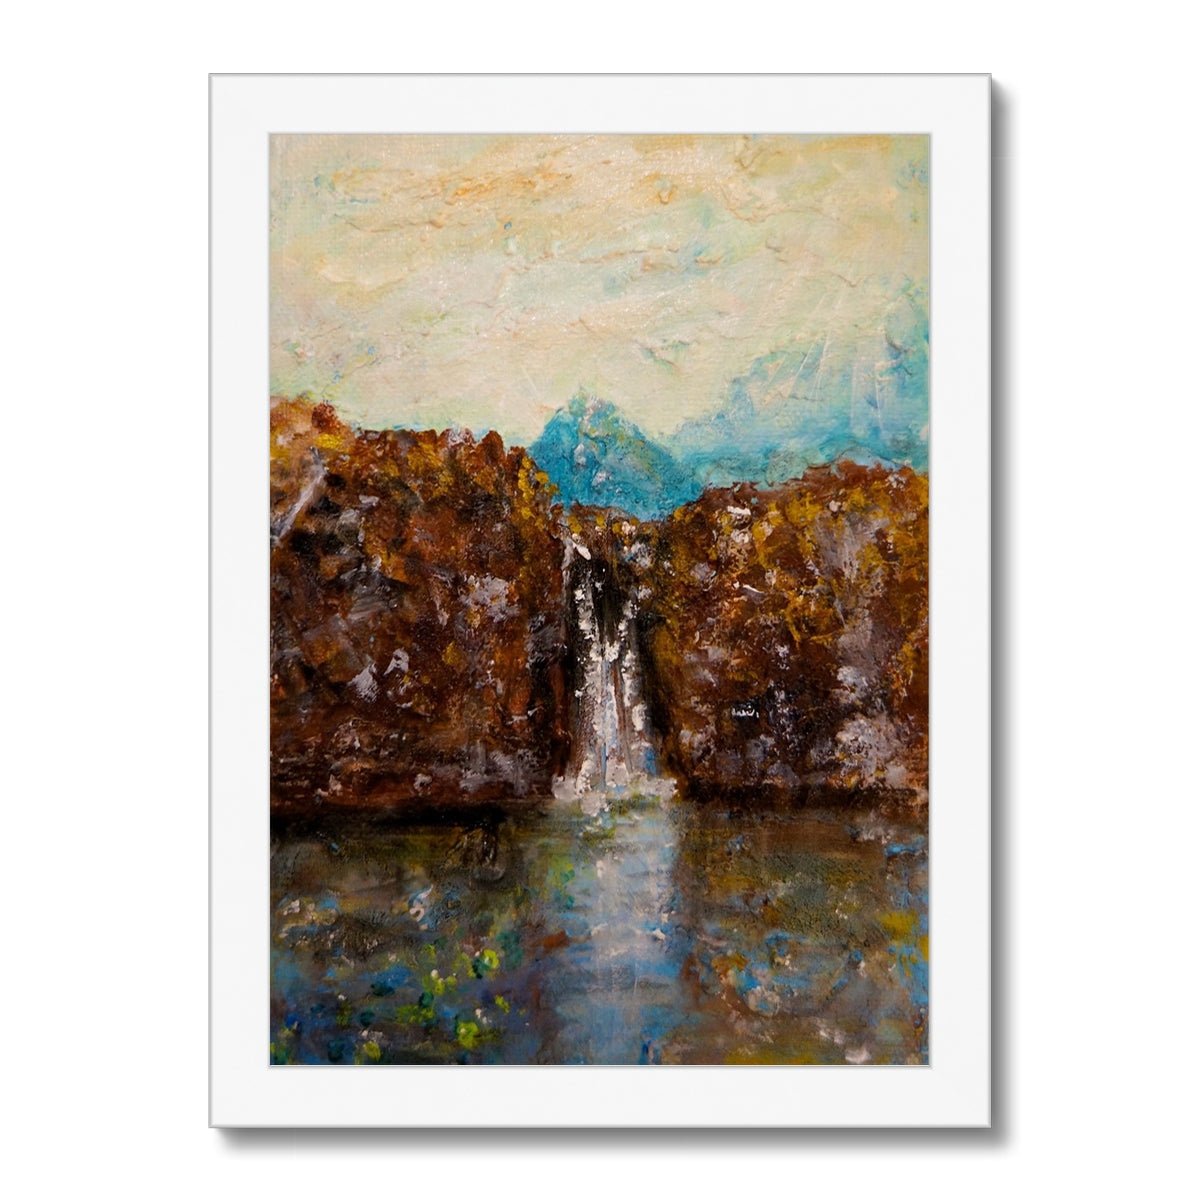 Skye Fairy Pools Painting | Framed Prints From Scotland-Framed Prints-Skye Art Gallery-A4 Portrait-White Frame-Paintings, Prints, Homeware, Art Gifts From Scotland By Scottish Artist Kevin Hunter